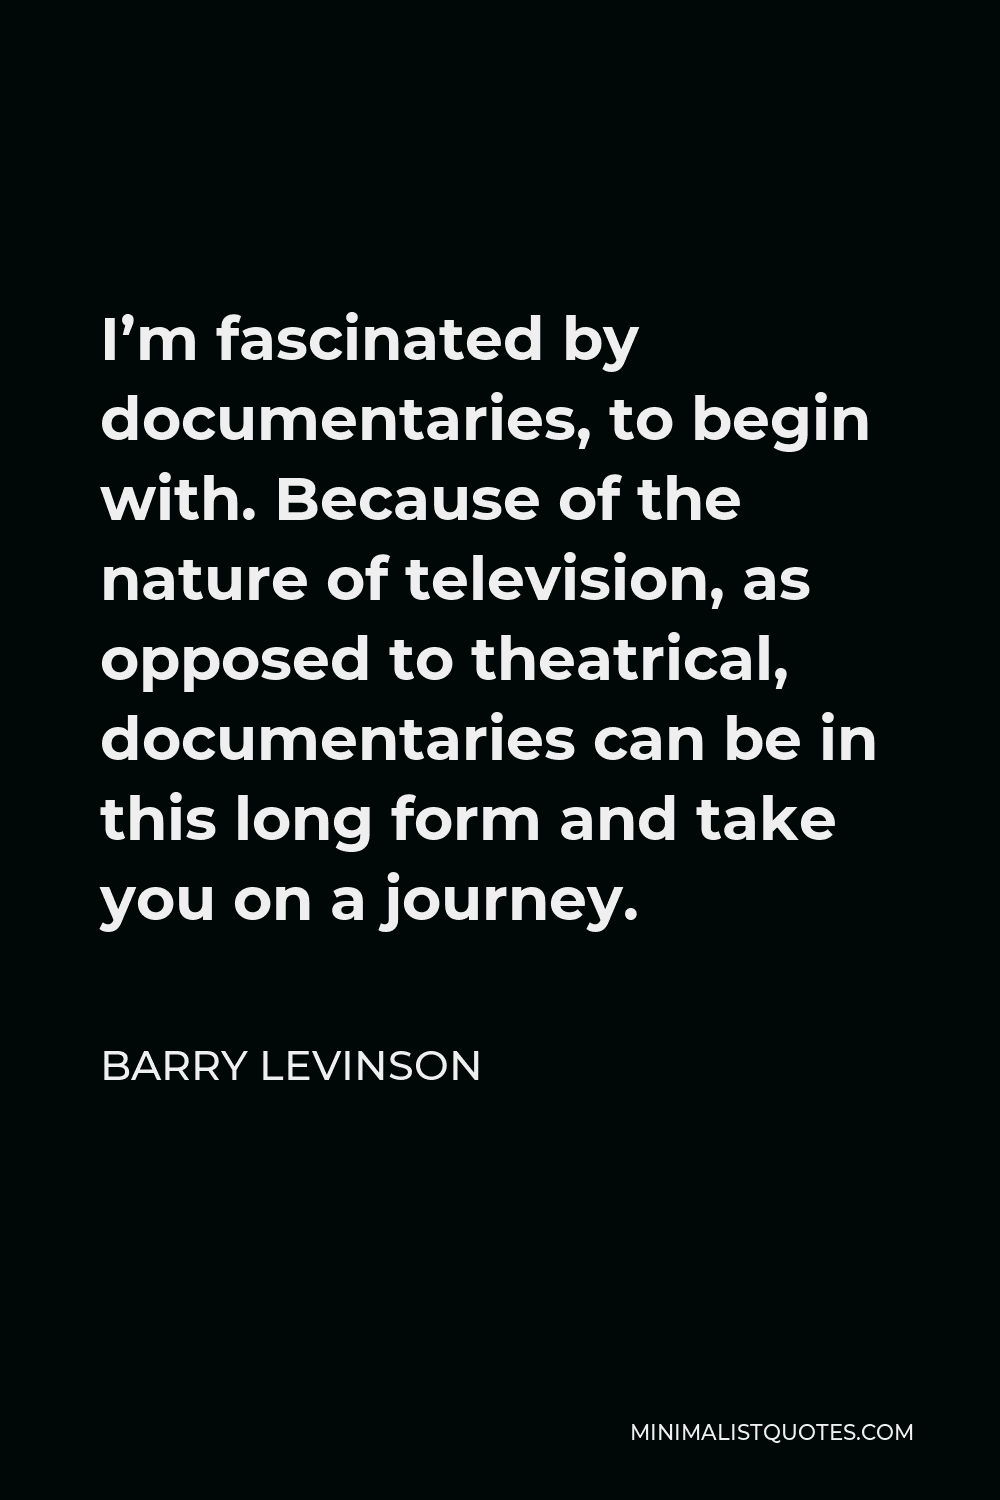 Barry Levinson Quote - I’m fascinated by documentaries, to begin with. Because of the nature of television, as opposed to theatrical, documentaries can be in this long form and take you on a journey.